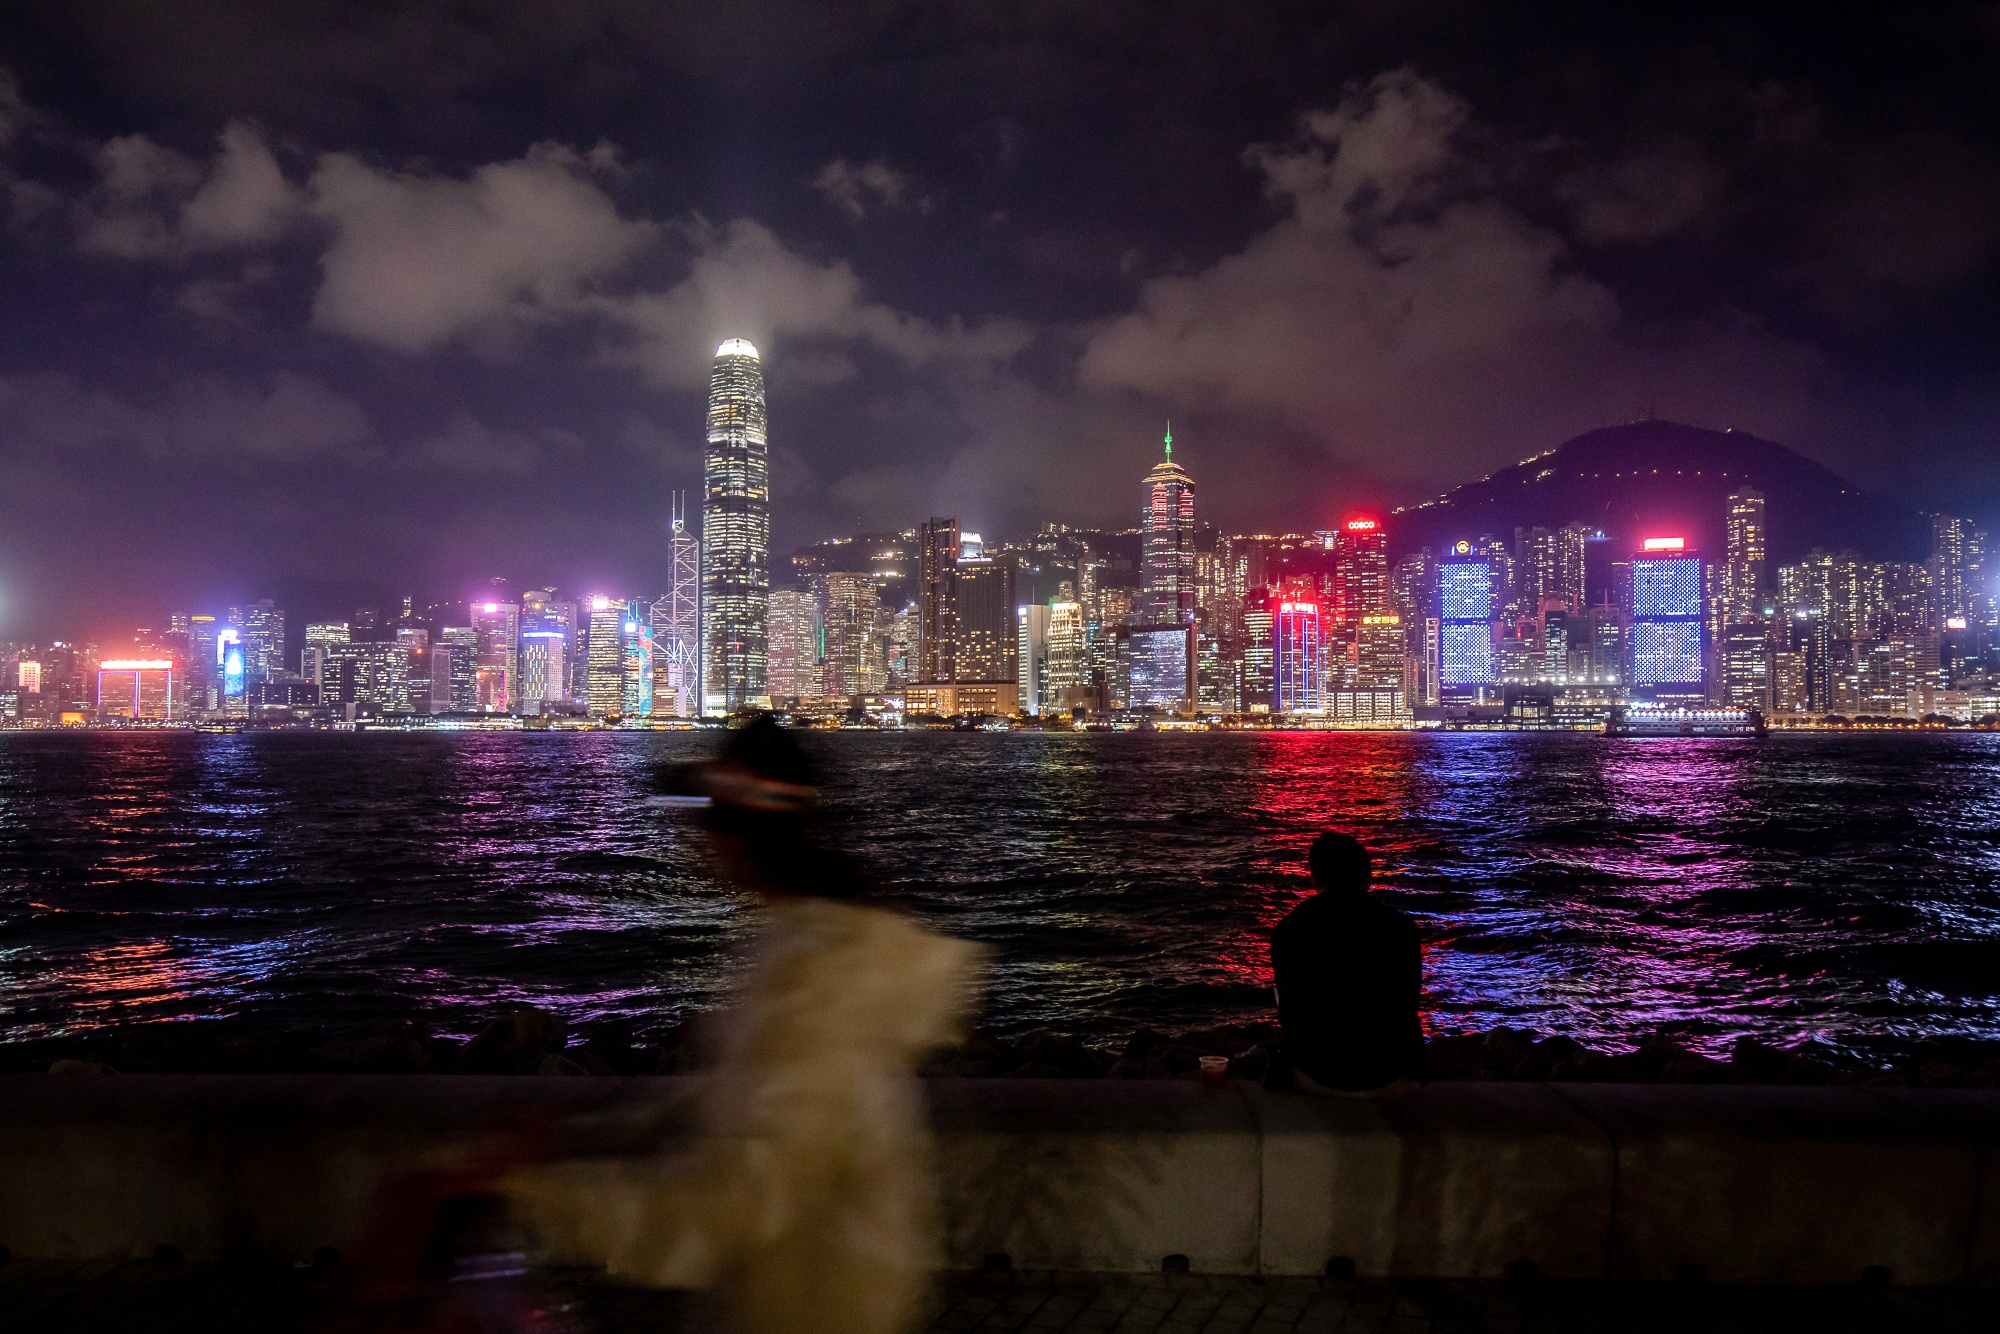 A pedestrian walks along a promenade in front of the city's skyline in Hong Kong, China.